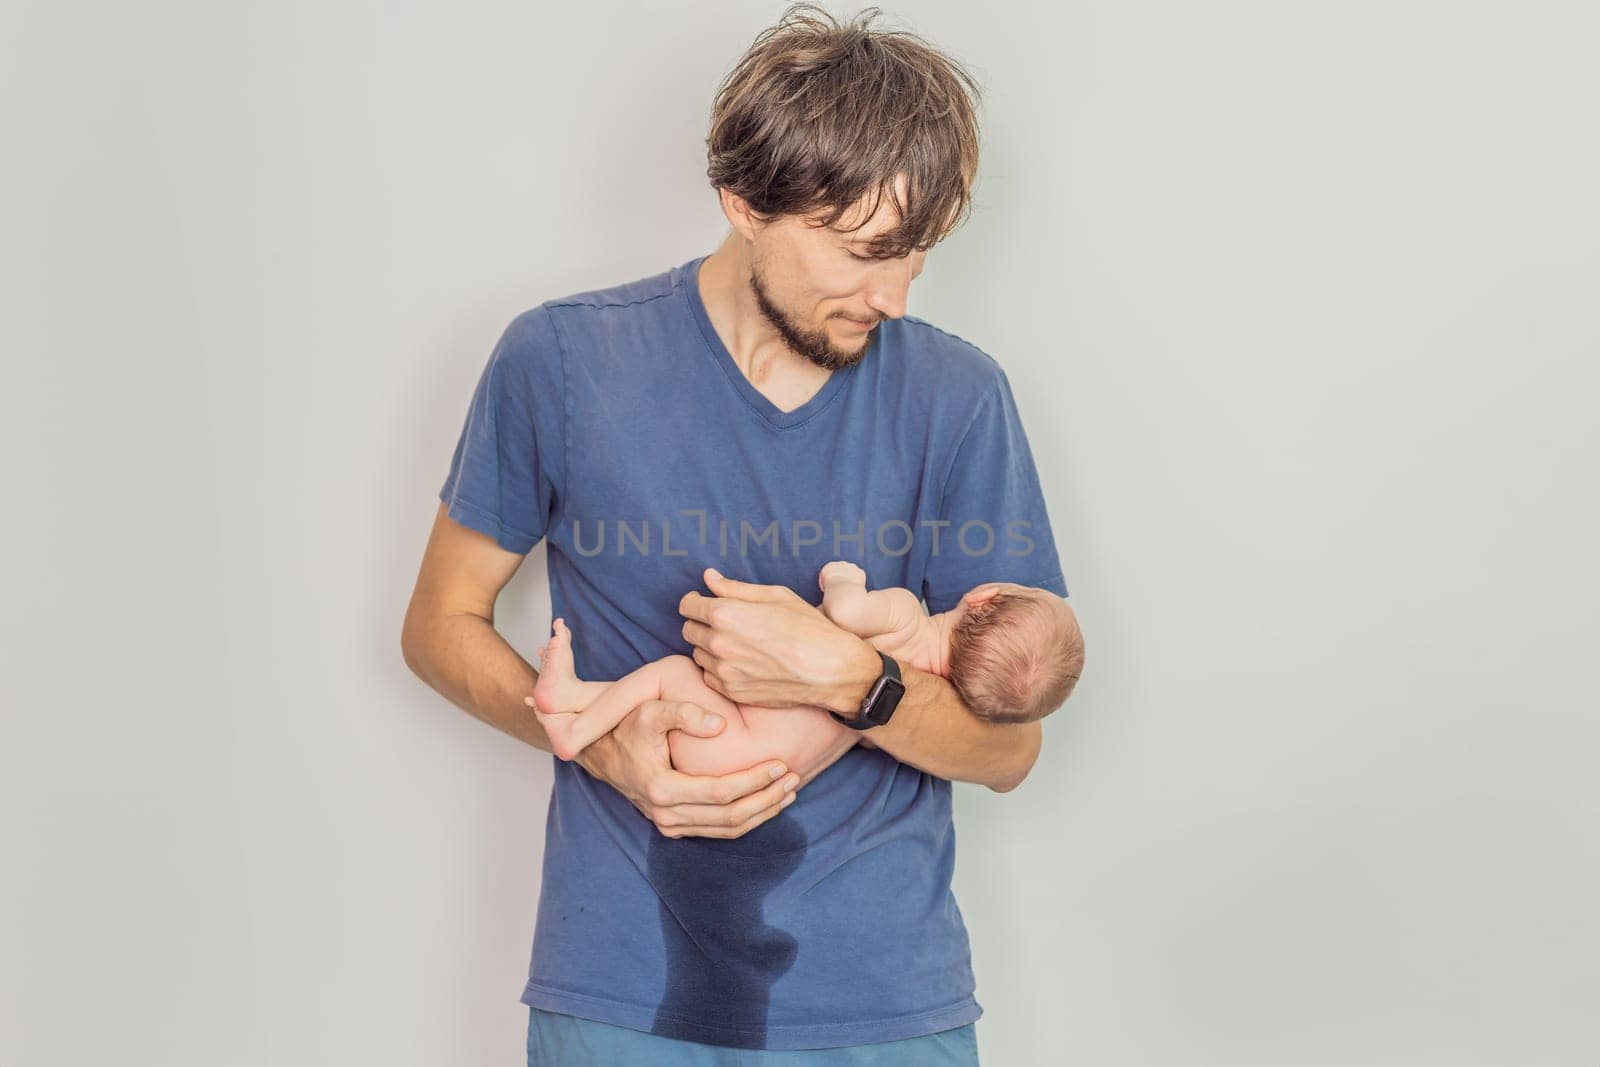 Dad holds newborn and newborn peed on dad. This humorous and heartwarming moment captures the realities of parenting and the bond between father and child in a candid family setting.